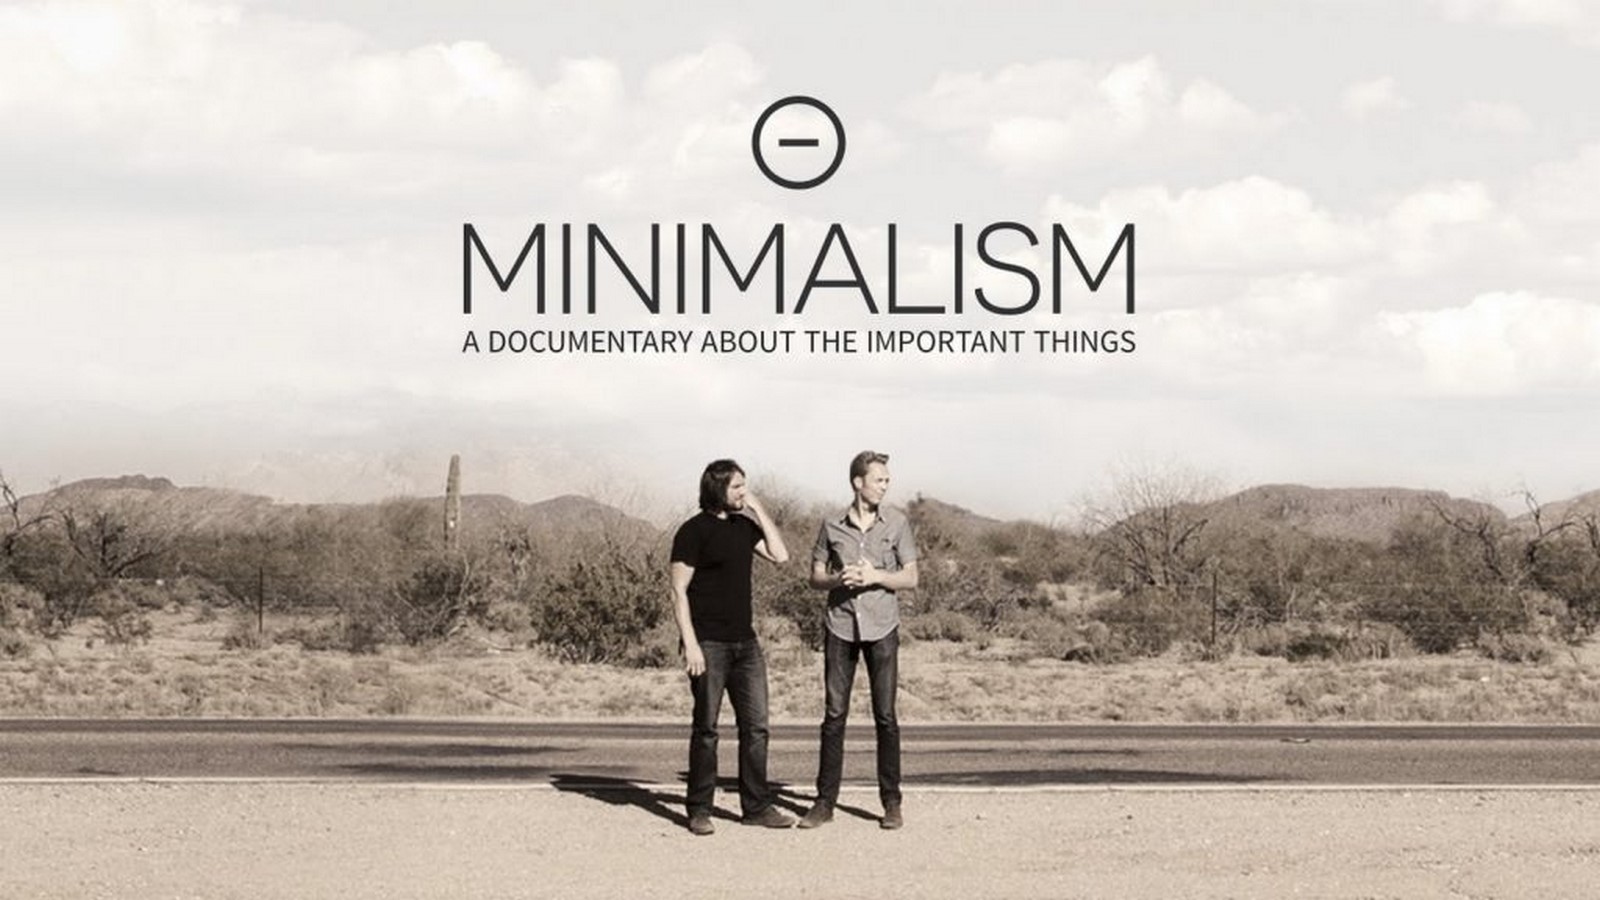 Minimalism: A Documentary About the Important Things (Minimalismo: un documental sobre las cosas importantes)